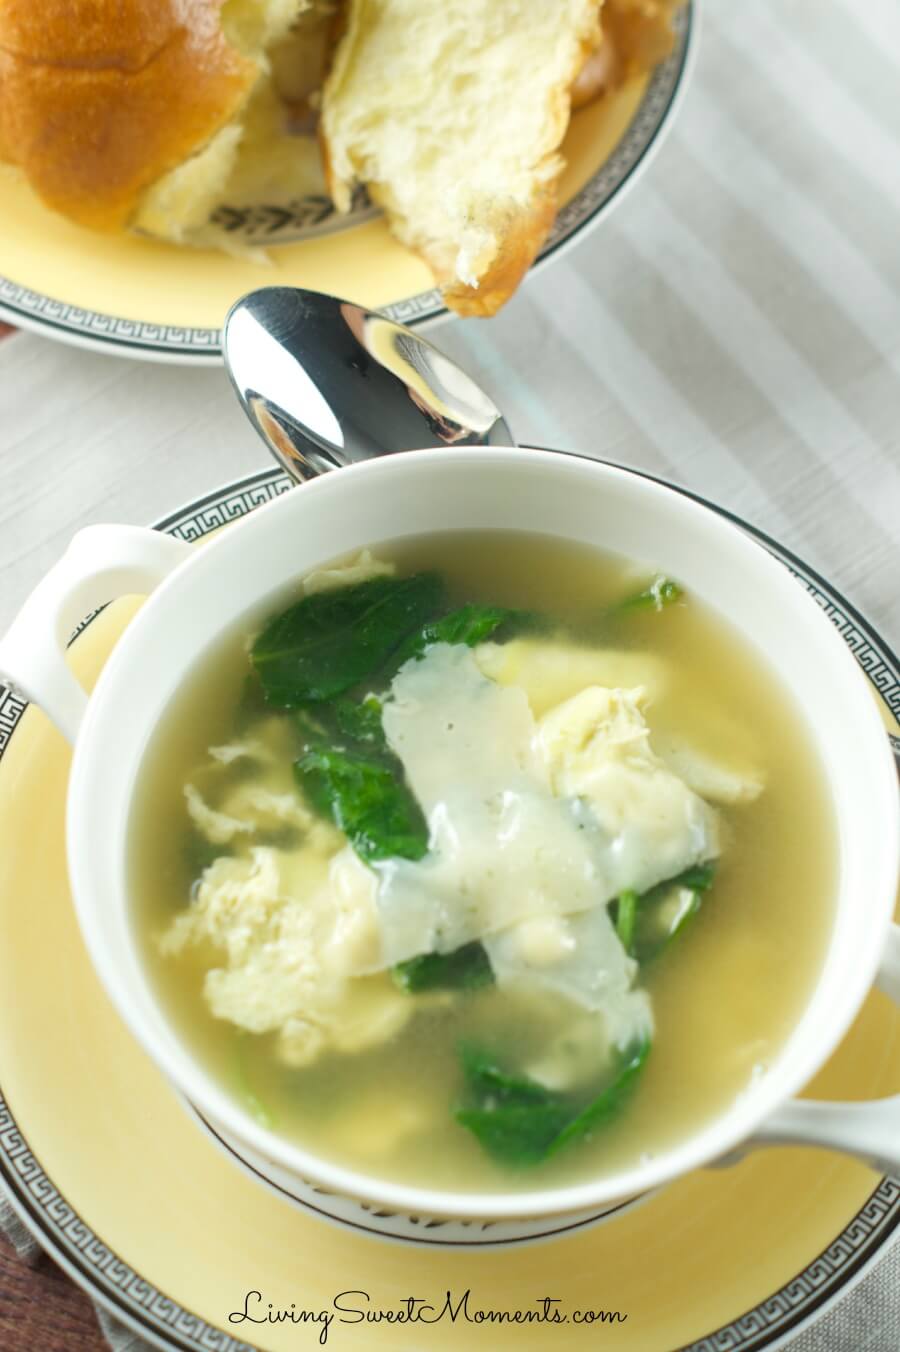 La Stracciatella Soup - Only 4 ingredients and ready in 10 minutes. This Italian Egg Drop Soup is delicious, filling and perfect for quick weeknight dinner. 